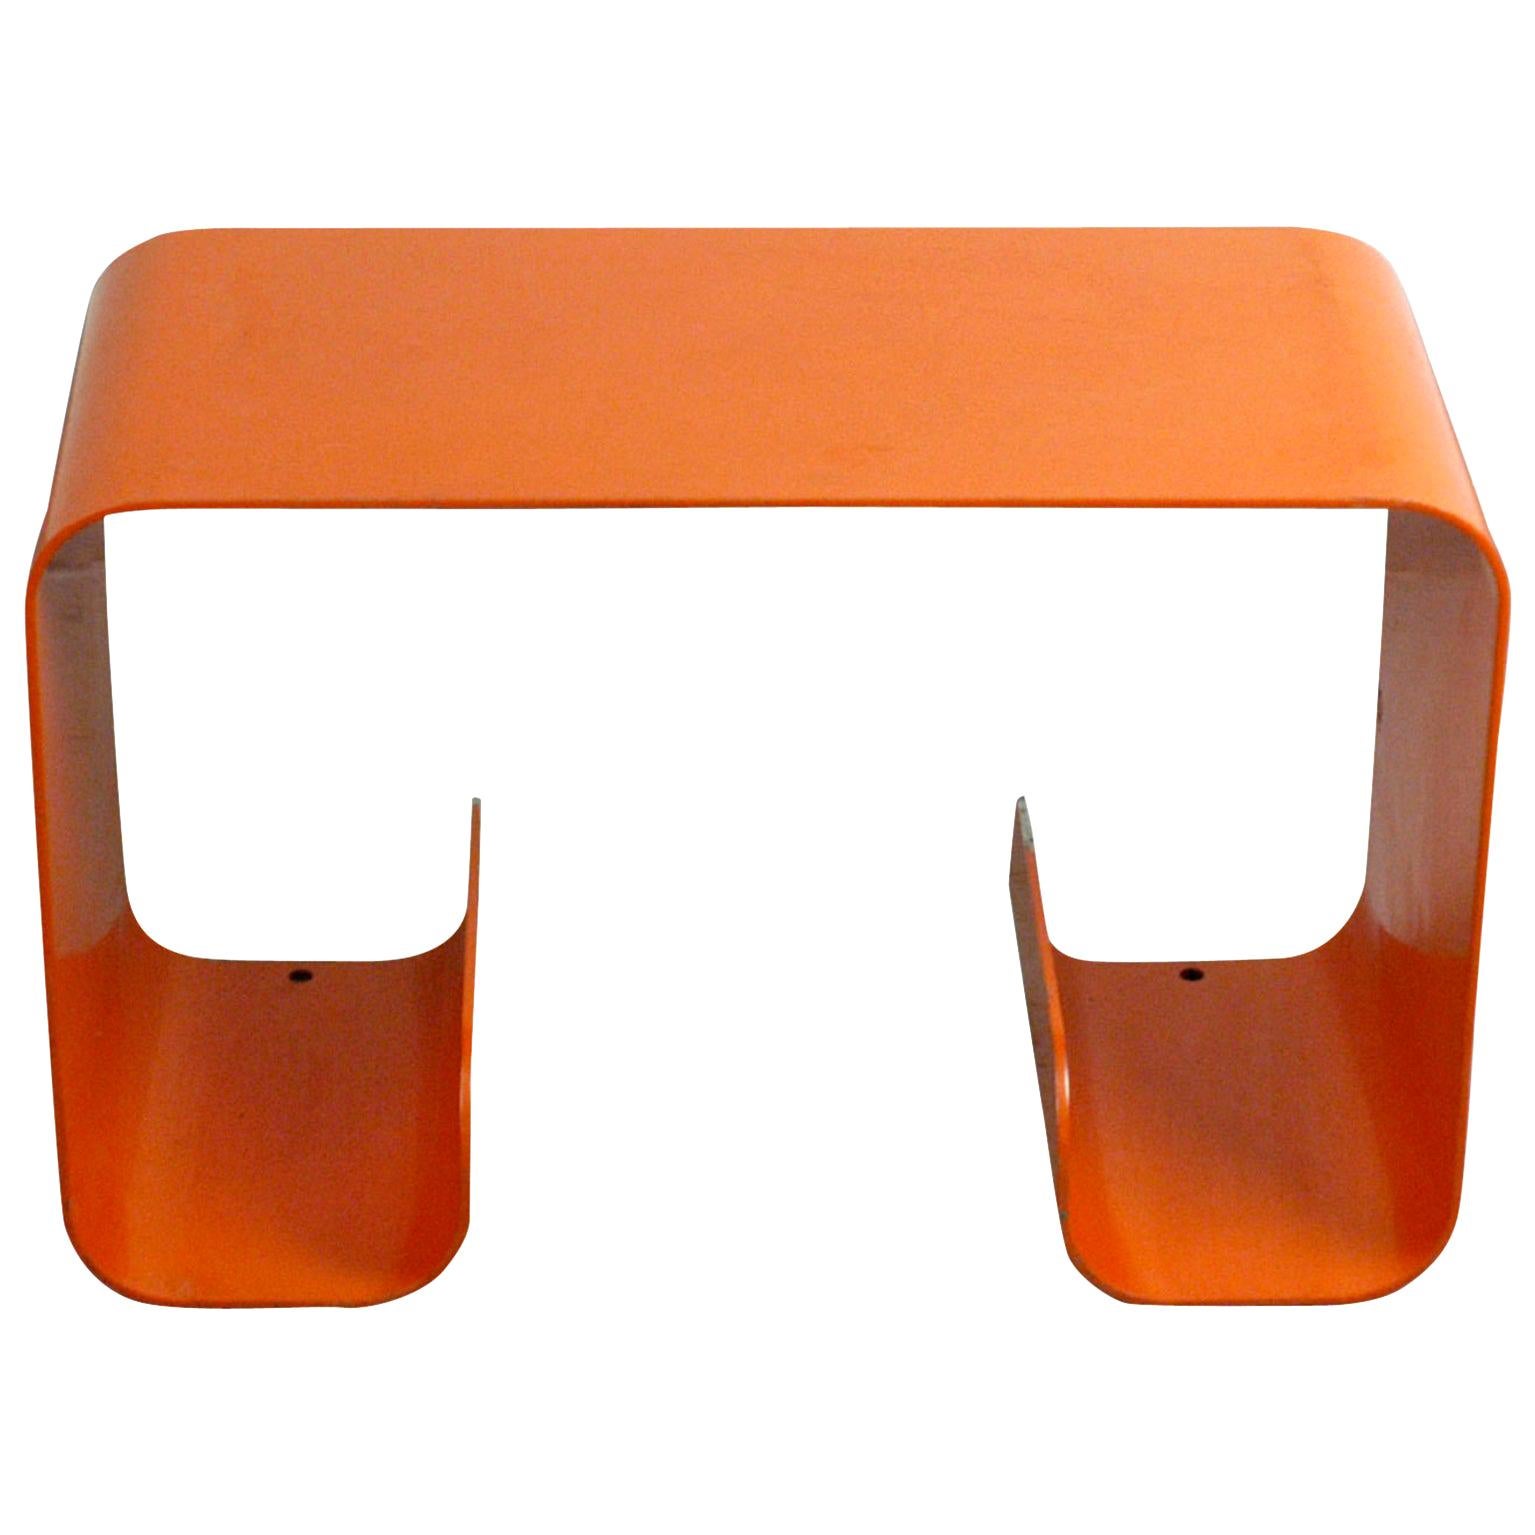 Orange Lacquered Metal Waterfall Console Table from the 1970s